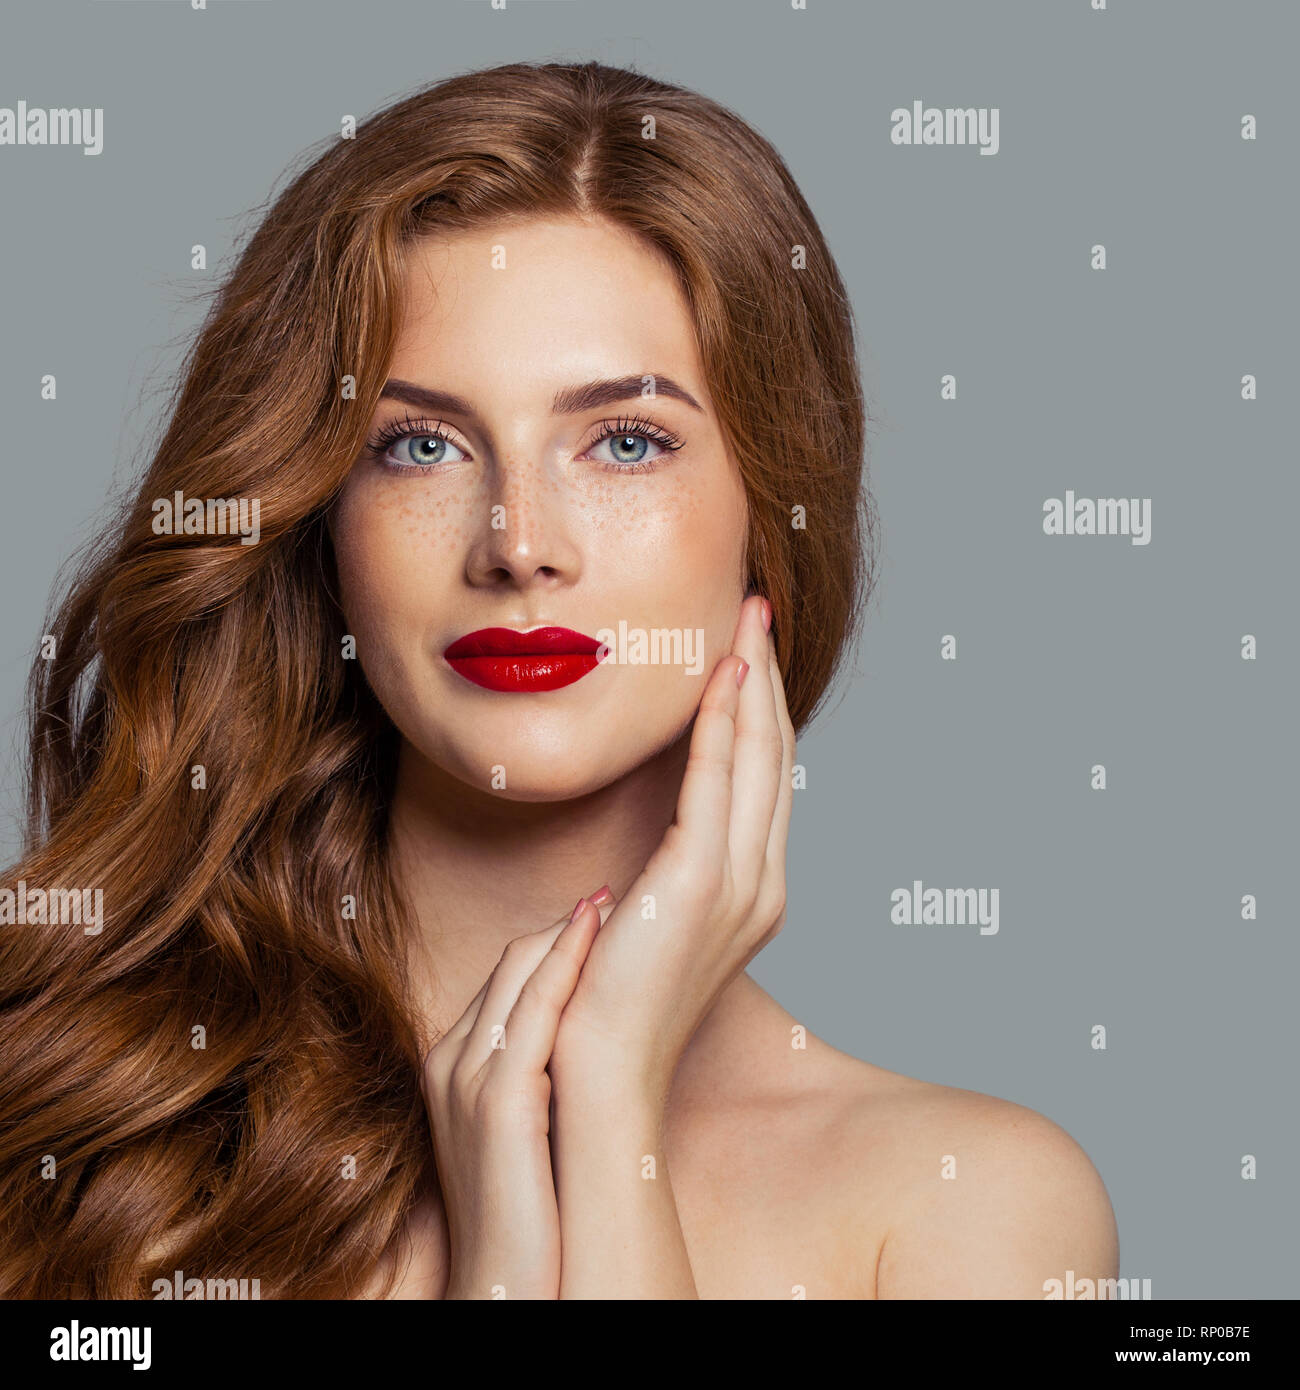 Attractive redhead girl with red lips makeup looking at camera, perfect face closeup Stock Photo